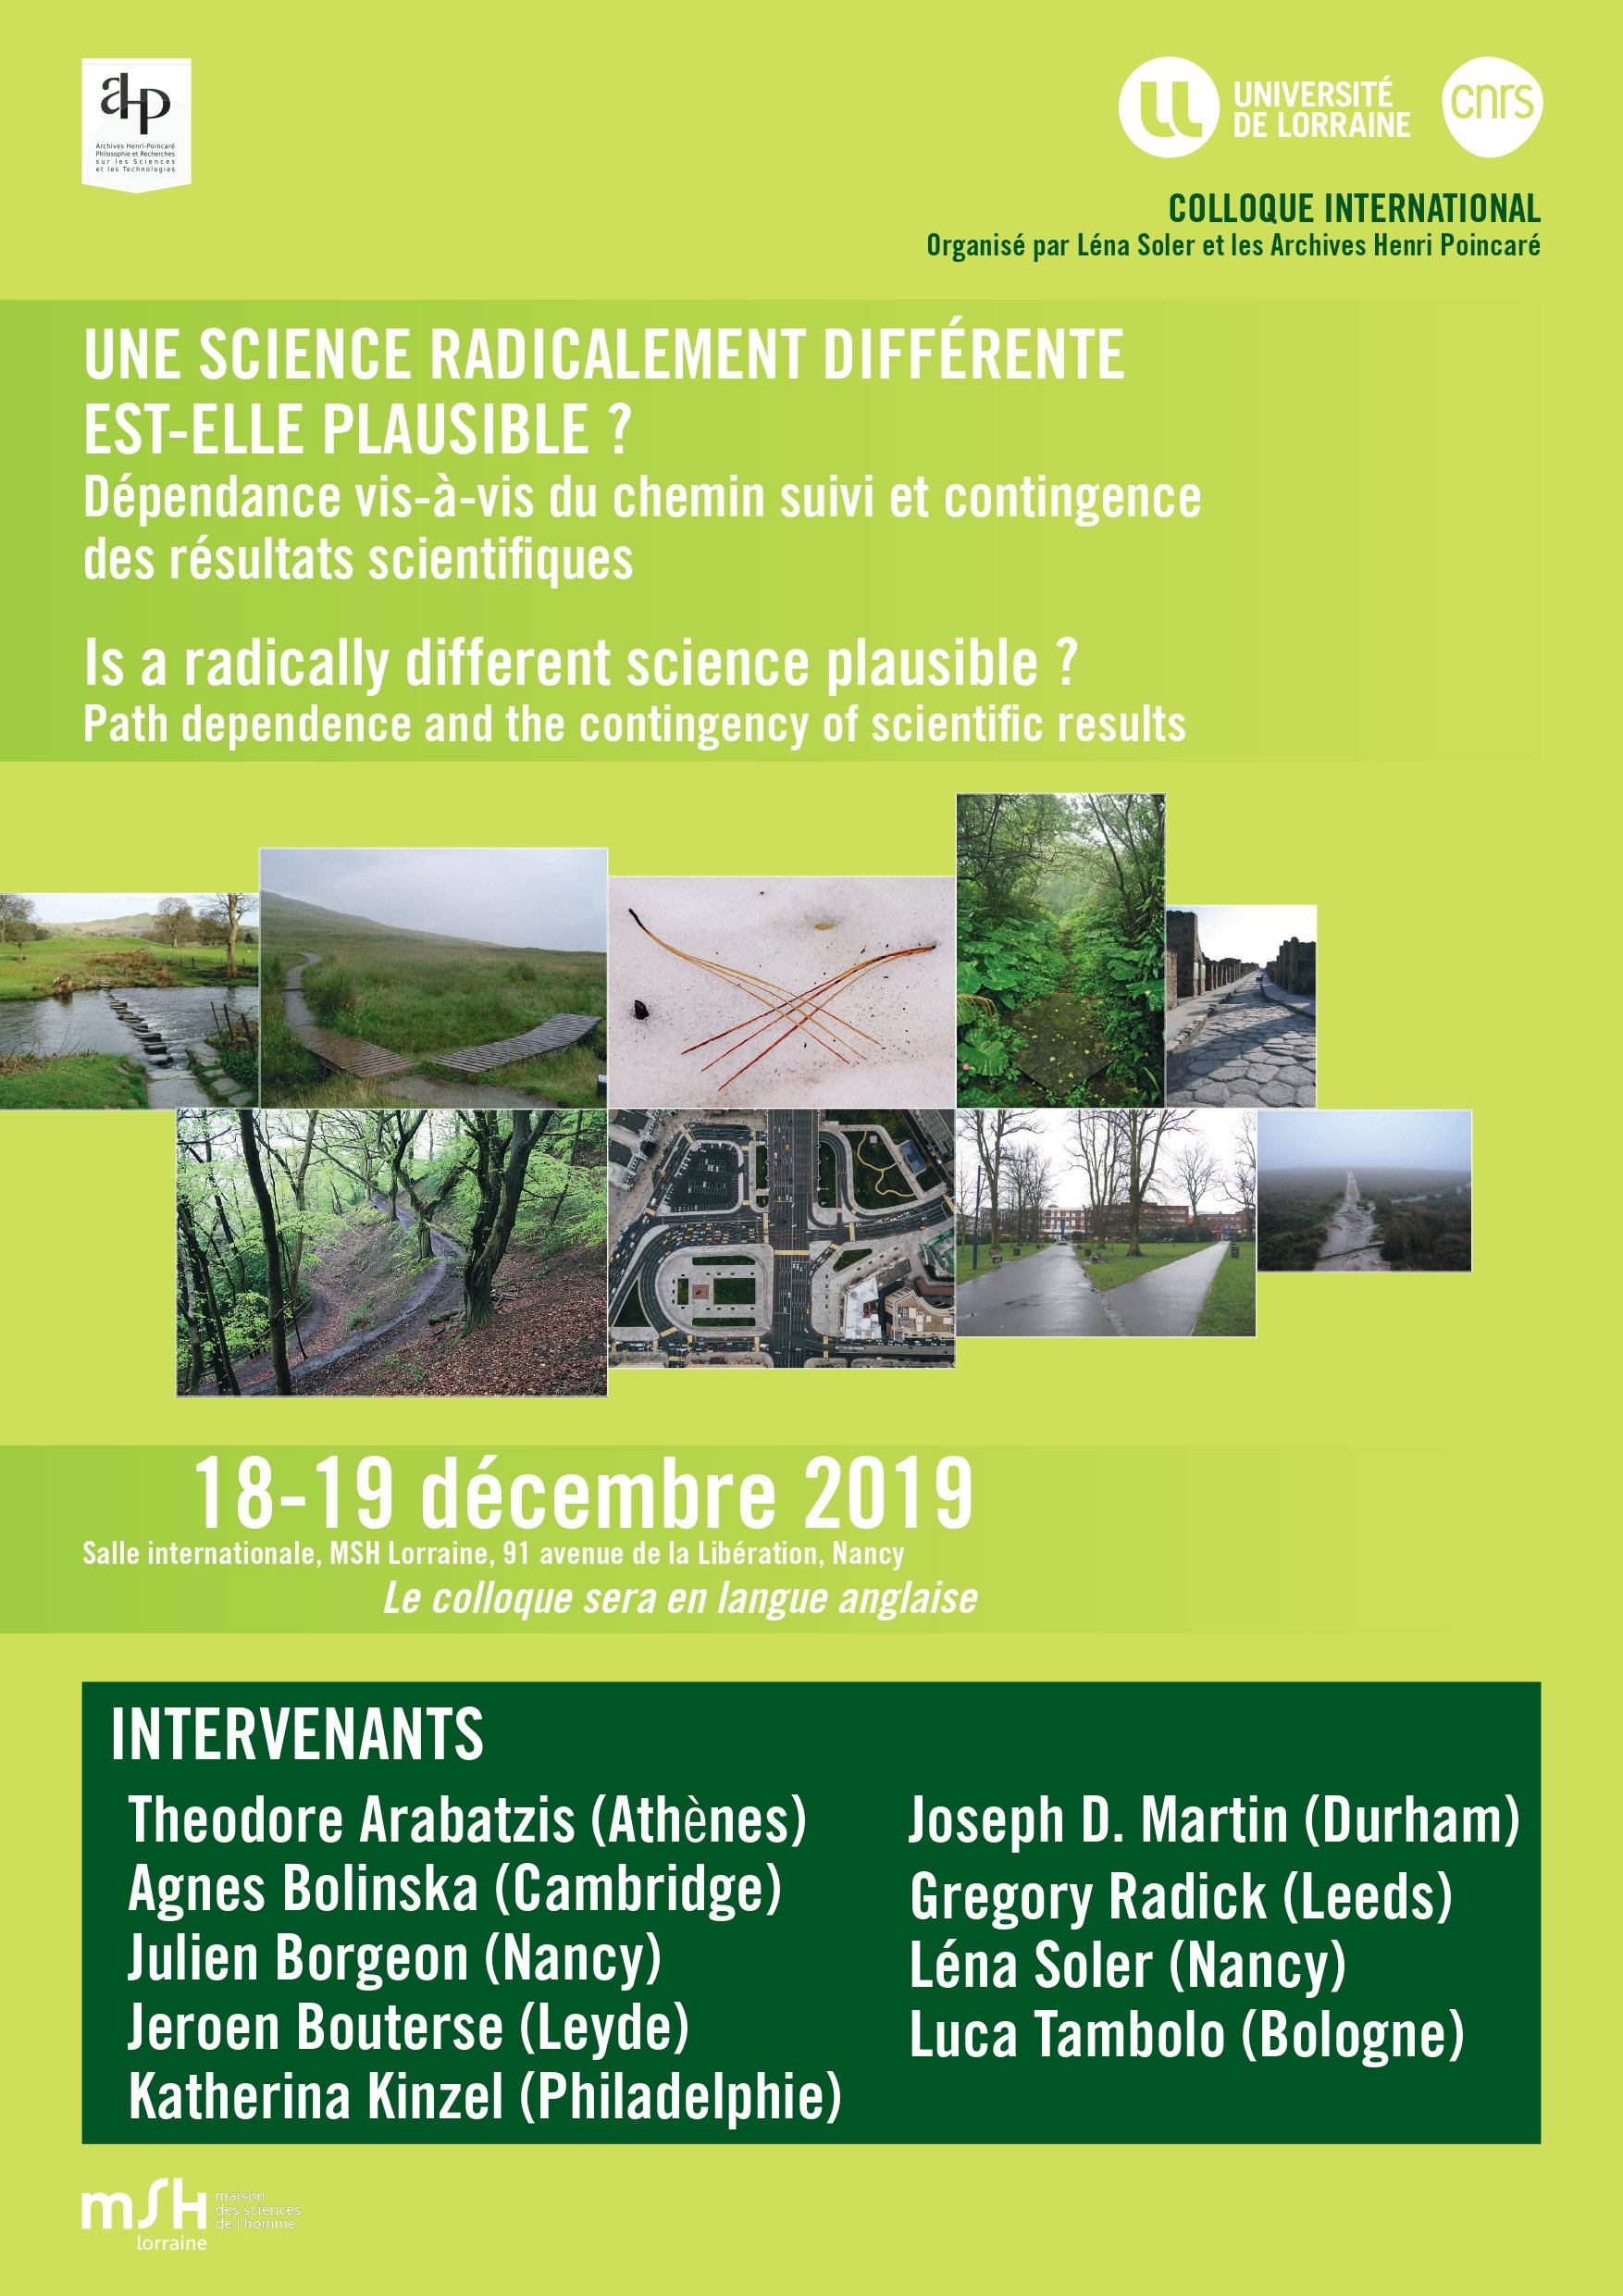 Save the date ! - Colloque international (18-19/12/2019) Vzpd